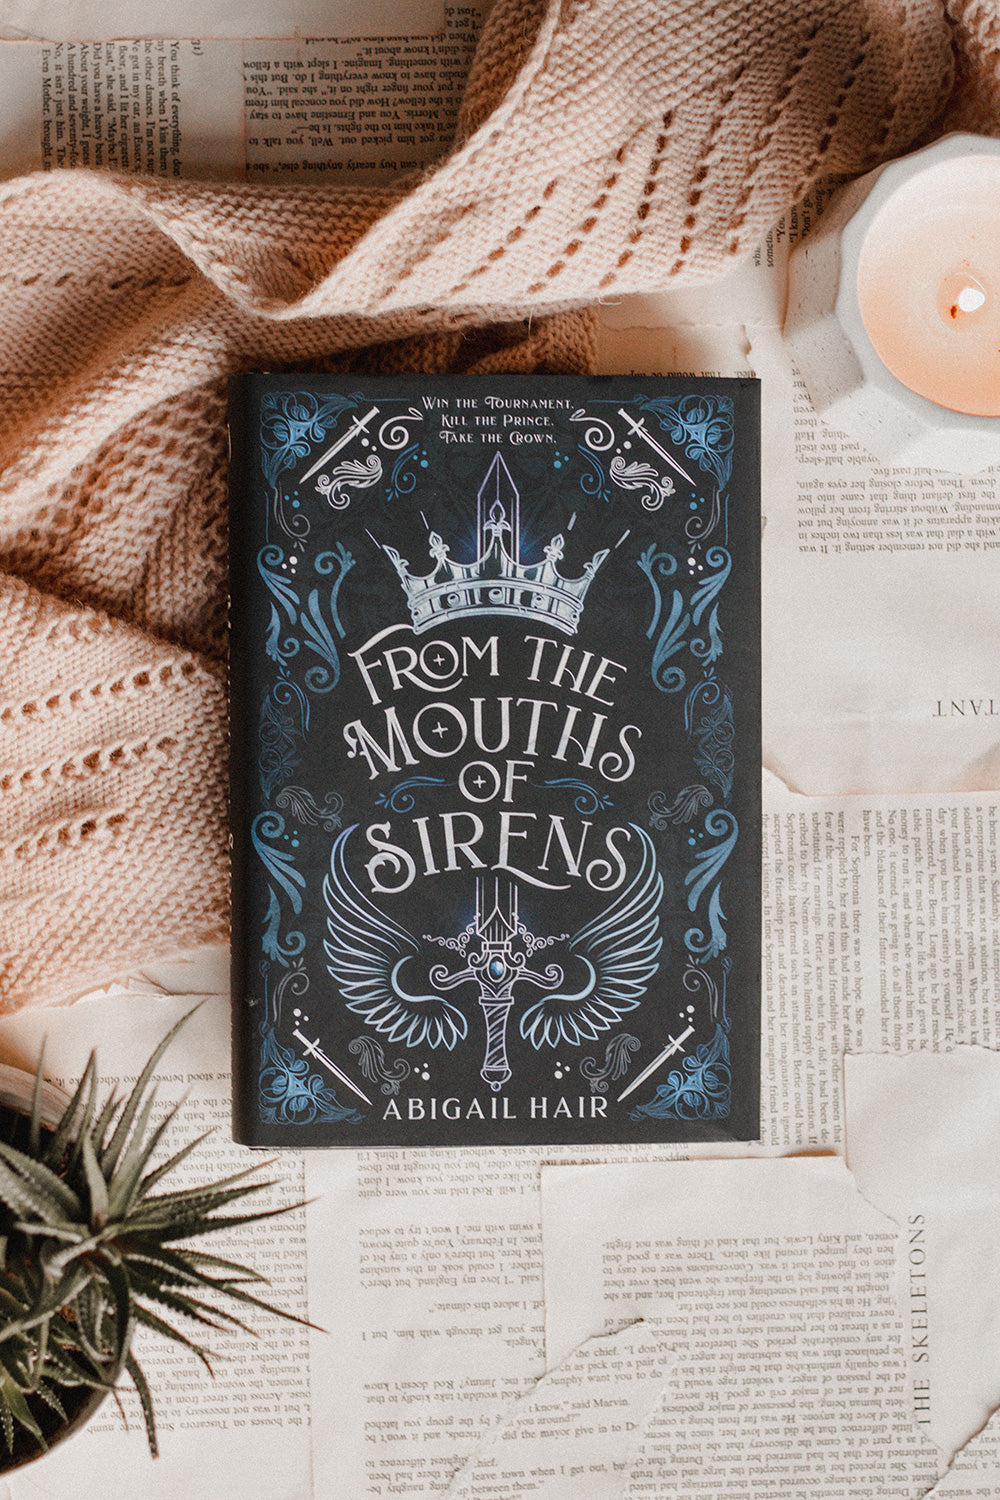 From the Mouths of Sirens by Abigail Hair